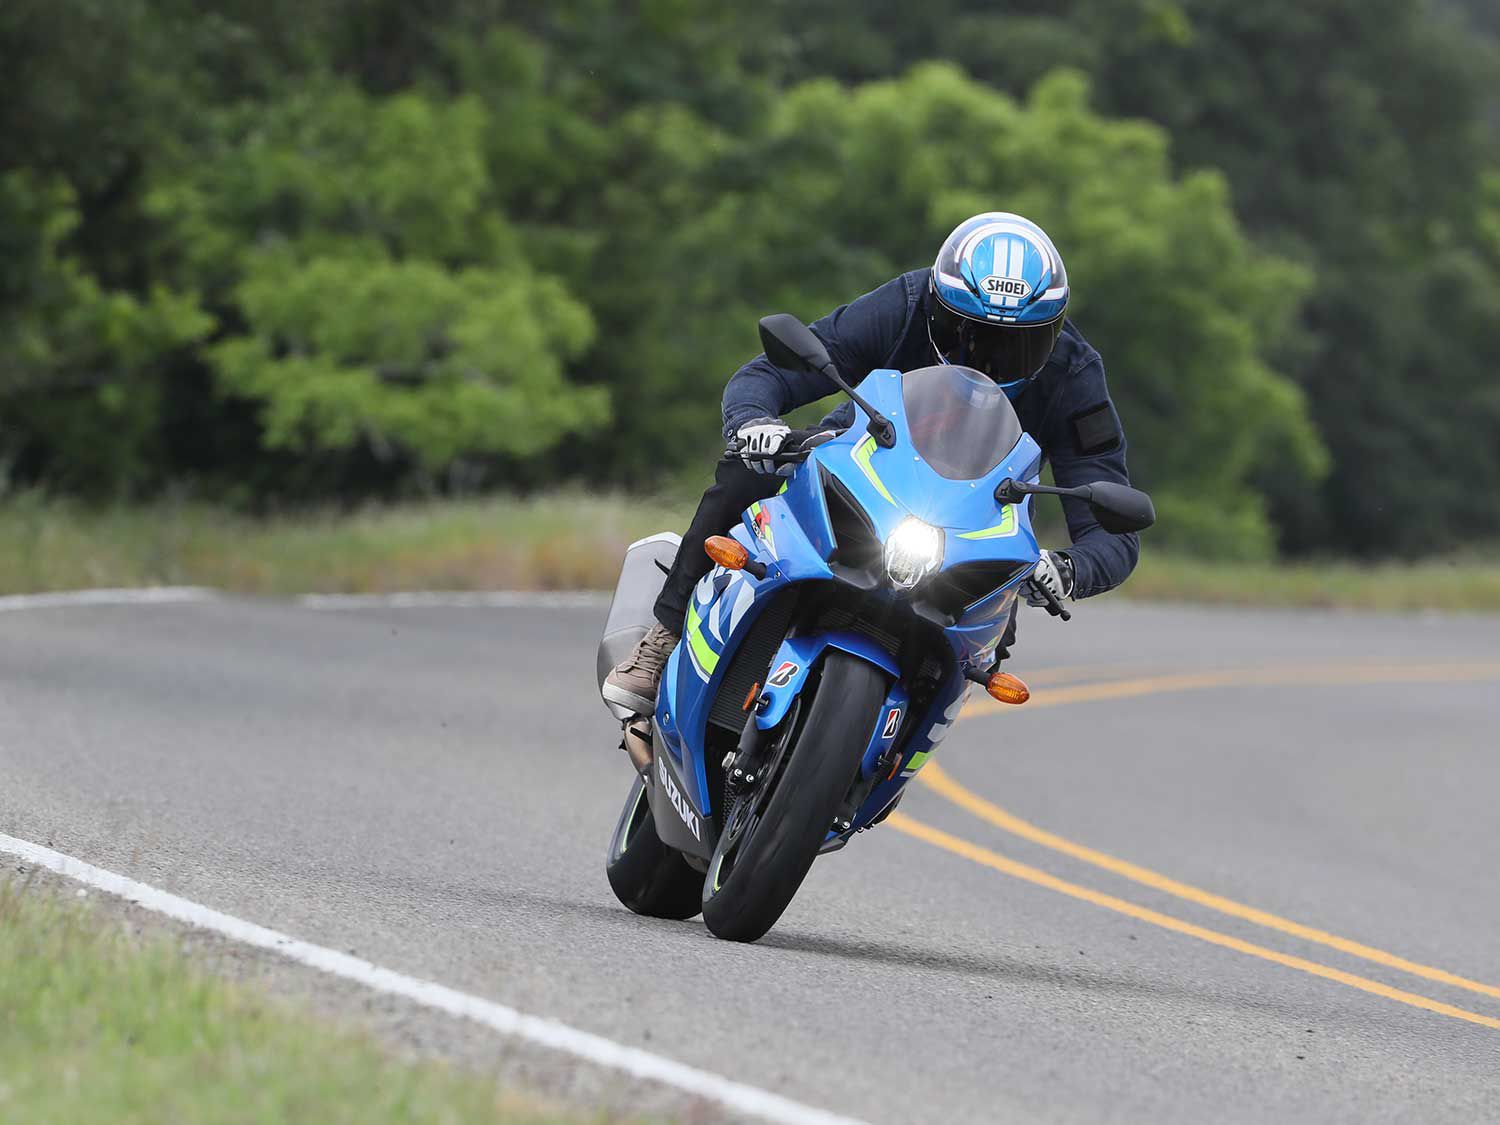 Suzuki’s GSX-R1000 has been one of the fastest production motorcycles you can buy for more than 16 years.